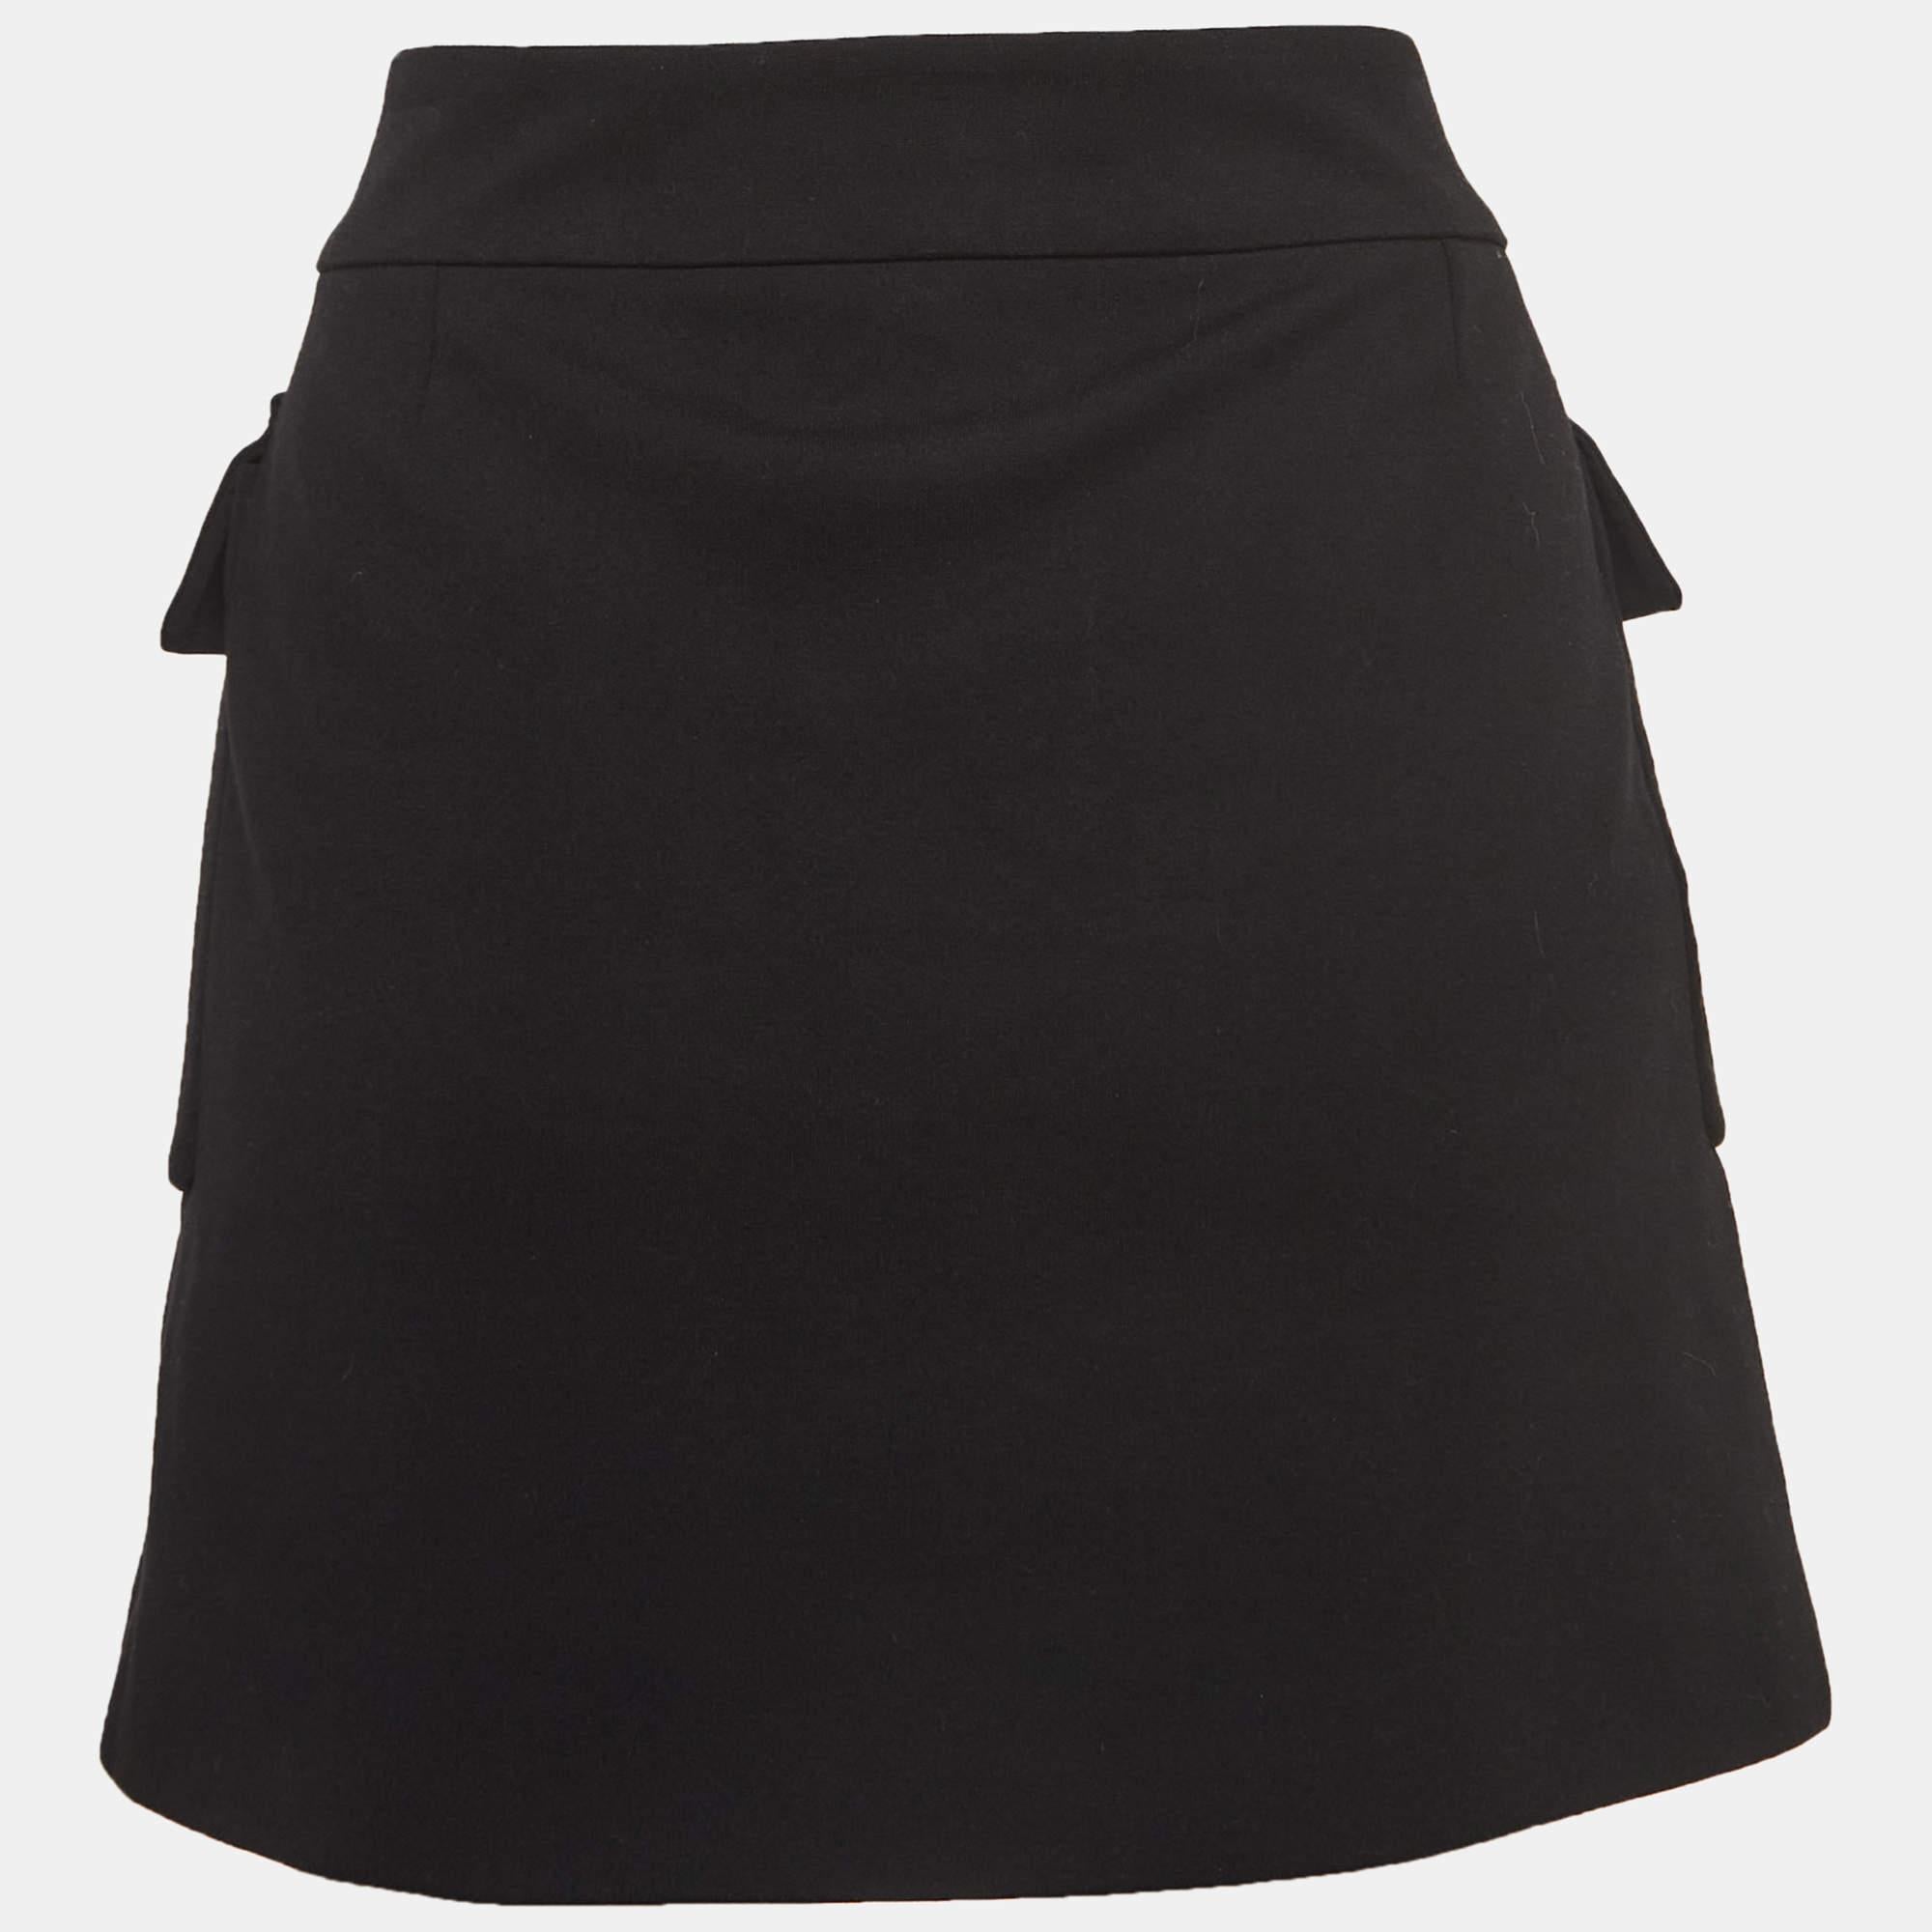 Experience the charm of designer clothing with this gorgeous skirt. Made from quality fabrics, the skirt has a simple allure and a great fit. Pair it up with a tailored blouse or a simple top and high heels.

